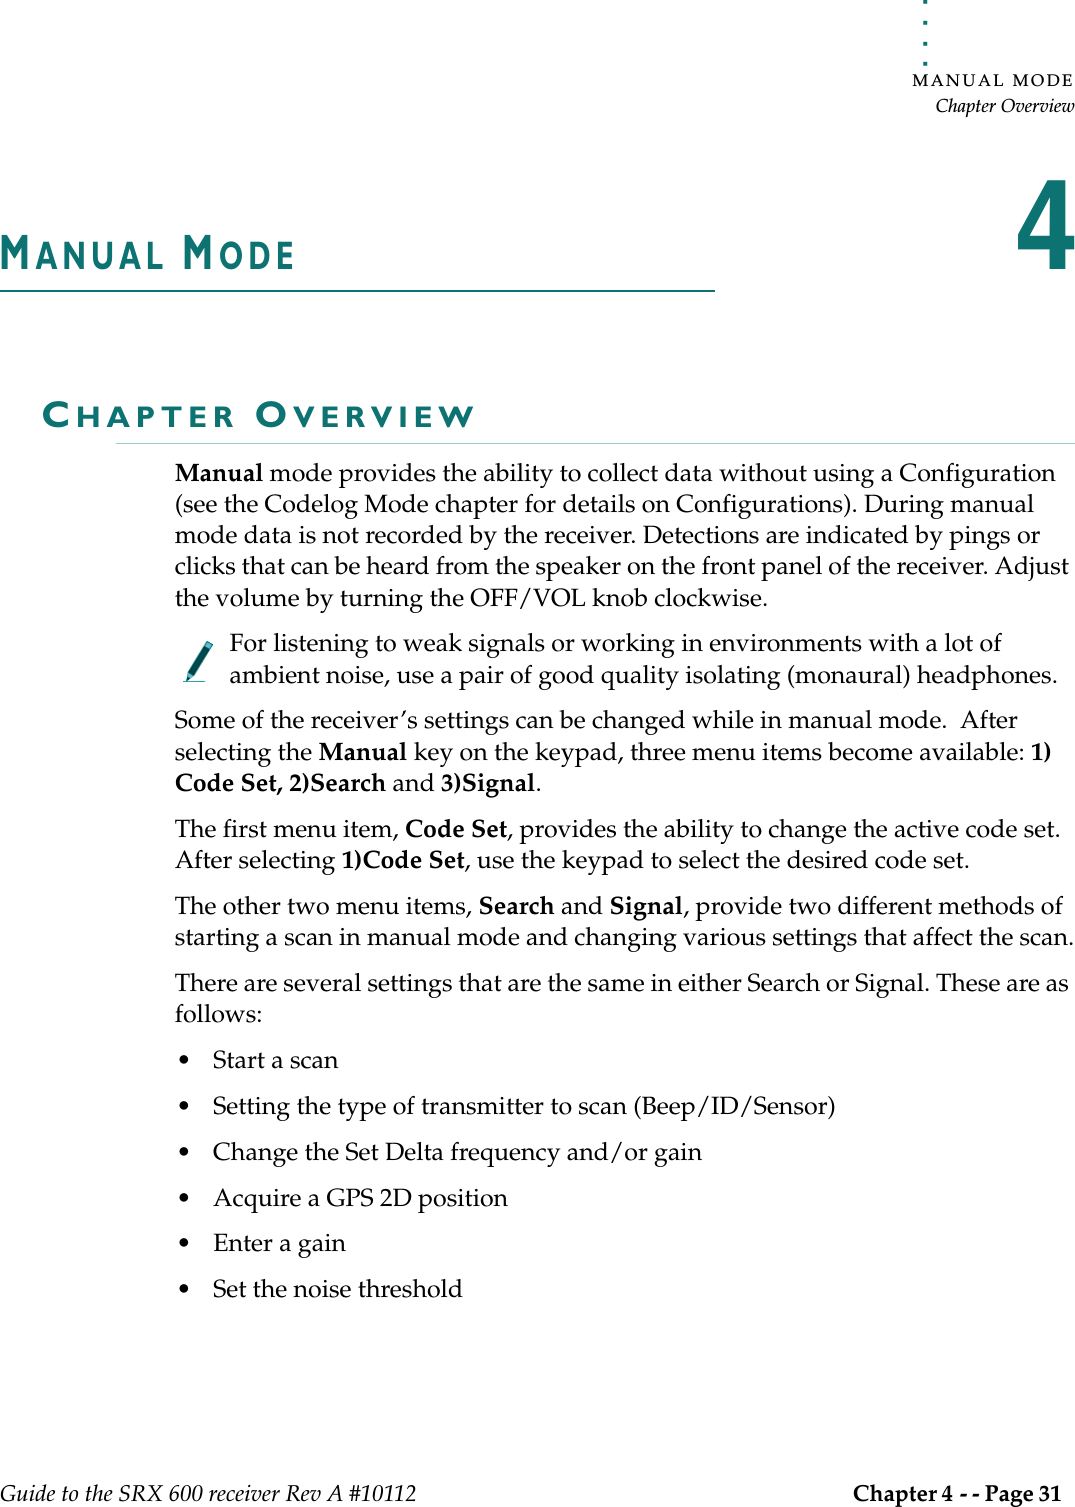 . . . . .MANUAL MODEChapter OverviewGuide to the SRX 600 receiver Rev A #10112 Chapter 4 - - Page 31 MANUAL MODE4CHAPTER OVERVIEWManual mode provides the ability to collect data without using a Configuration (see the Codelog Mode chapter for details on Configurations). During manual mode data is not recorded by the receiver. Detections are indicated by pings or clicks that can be heard from the speaker on the front panel of the receiver. Adjust the volume by turning the OFF/VOL knob clockwise. For listening to weak signals or working in environments with a lot of ambient noise, use a pair of good quality isolating (monaural) headphones.Some of the receiver’s settings can be changed while in manual mode.  After selecting the Manual key on the keypad, three menu items become available: 1) Code Set, 2)Search and 3)Signal. The first menu item, Code Set, provides the ability to change the active code set. After selecting 1)Code Set, use the keypad to select the desired code set. The other two menu items, Search and Signal, provide two different methods of starting a scan in manual mode and changing various settings that affect the scan.There are several settings that are the same in either Search or Signal. These are as follows:• Start a scan • Setting the type of transmitter to scan (Beep/ID/Sensor)• Change the Set Delta frequency and/or gain • Acquire a GPS 2D position • Enter a gain• Set the noise threshold 